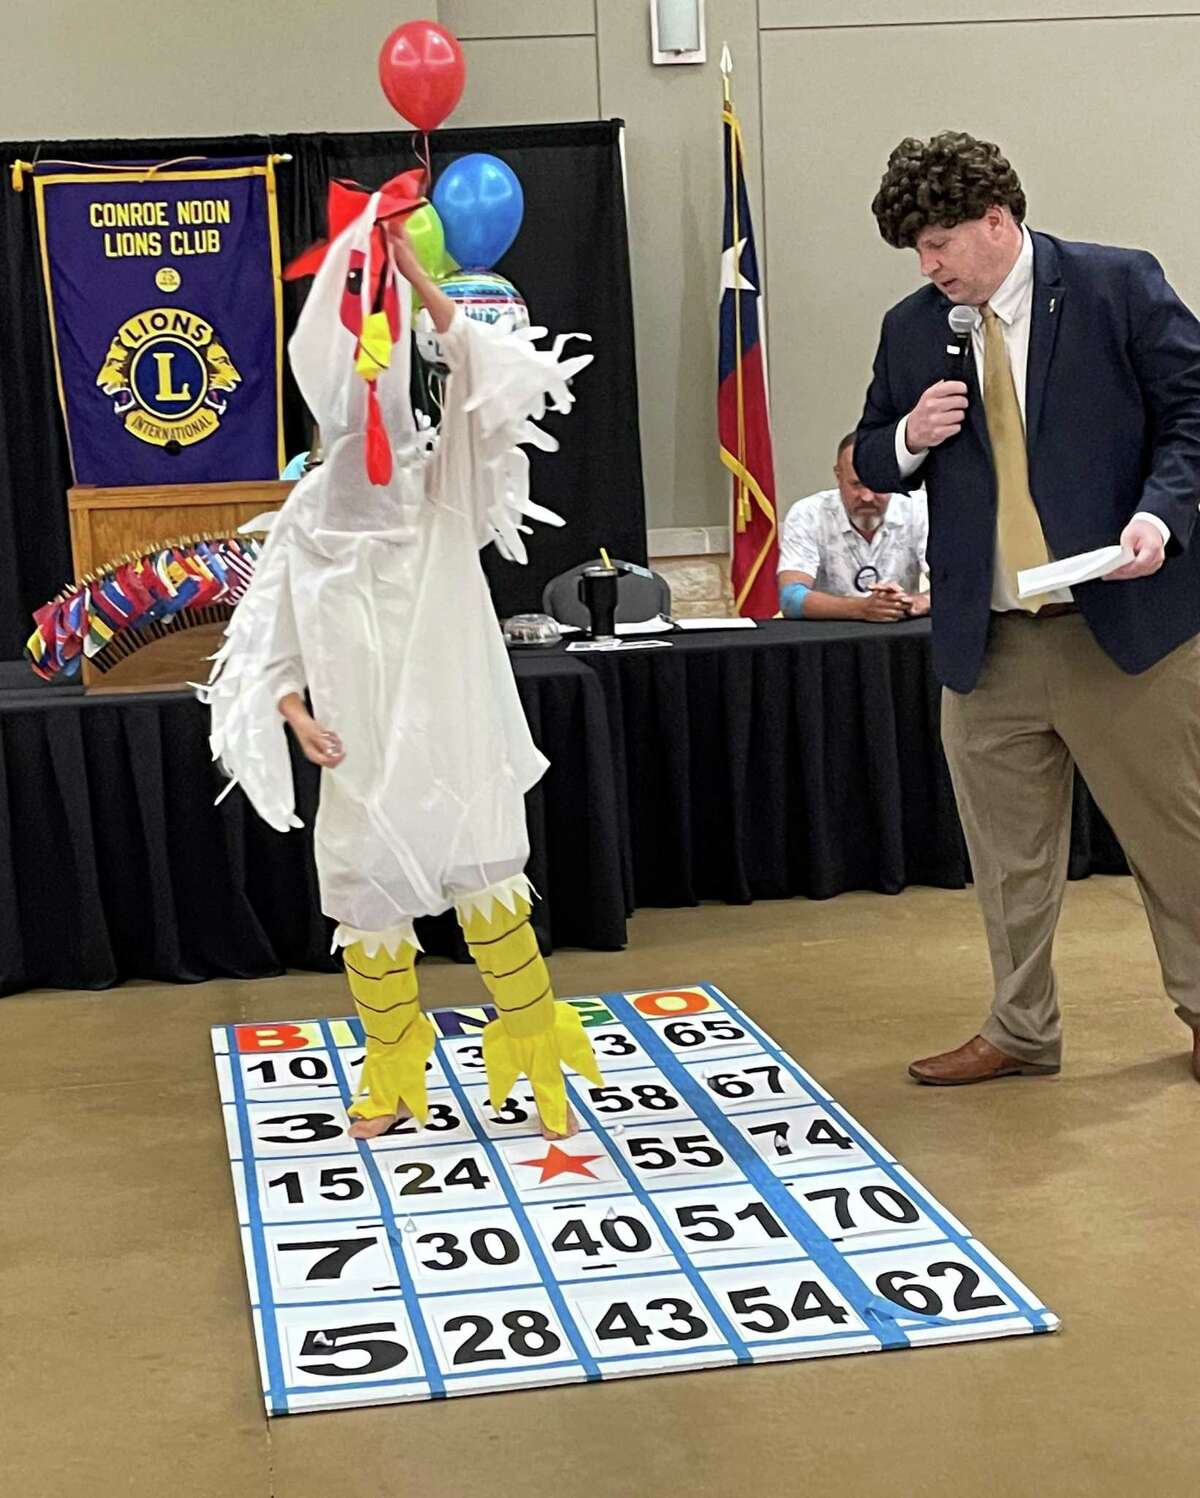 What do you do when the speaker cancels? Well, the Conroe Noon Lions Club had fun playing a game of Chicken ‘poo’ Bingo last week. Hosted by club President Warner ‘Wink’ Phelps and member Becca ‘the Beak’ Ellis.